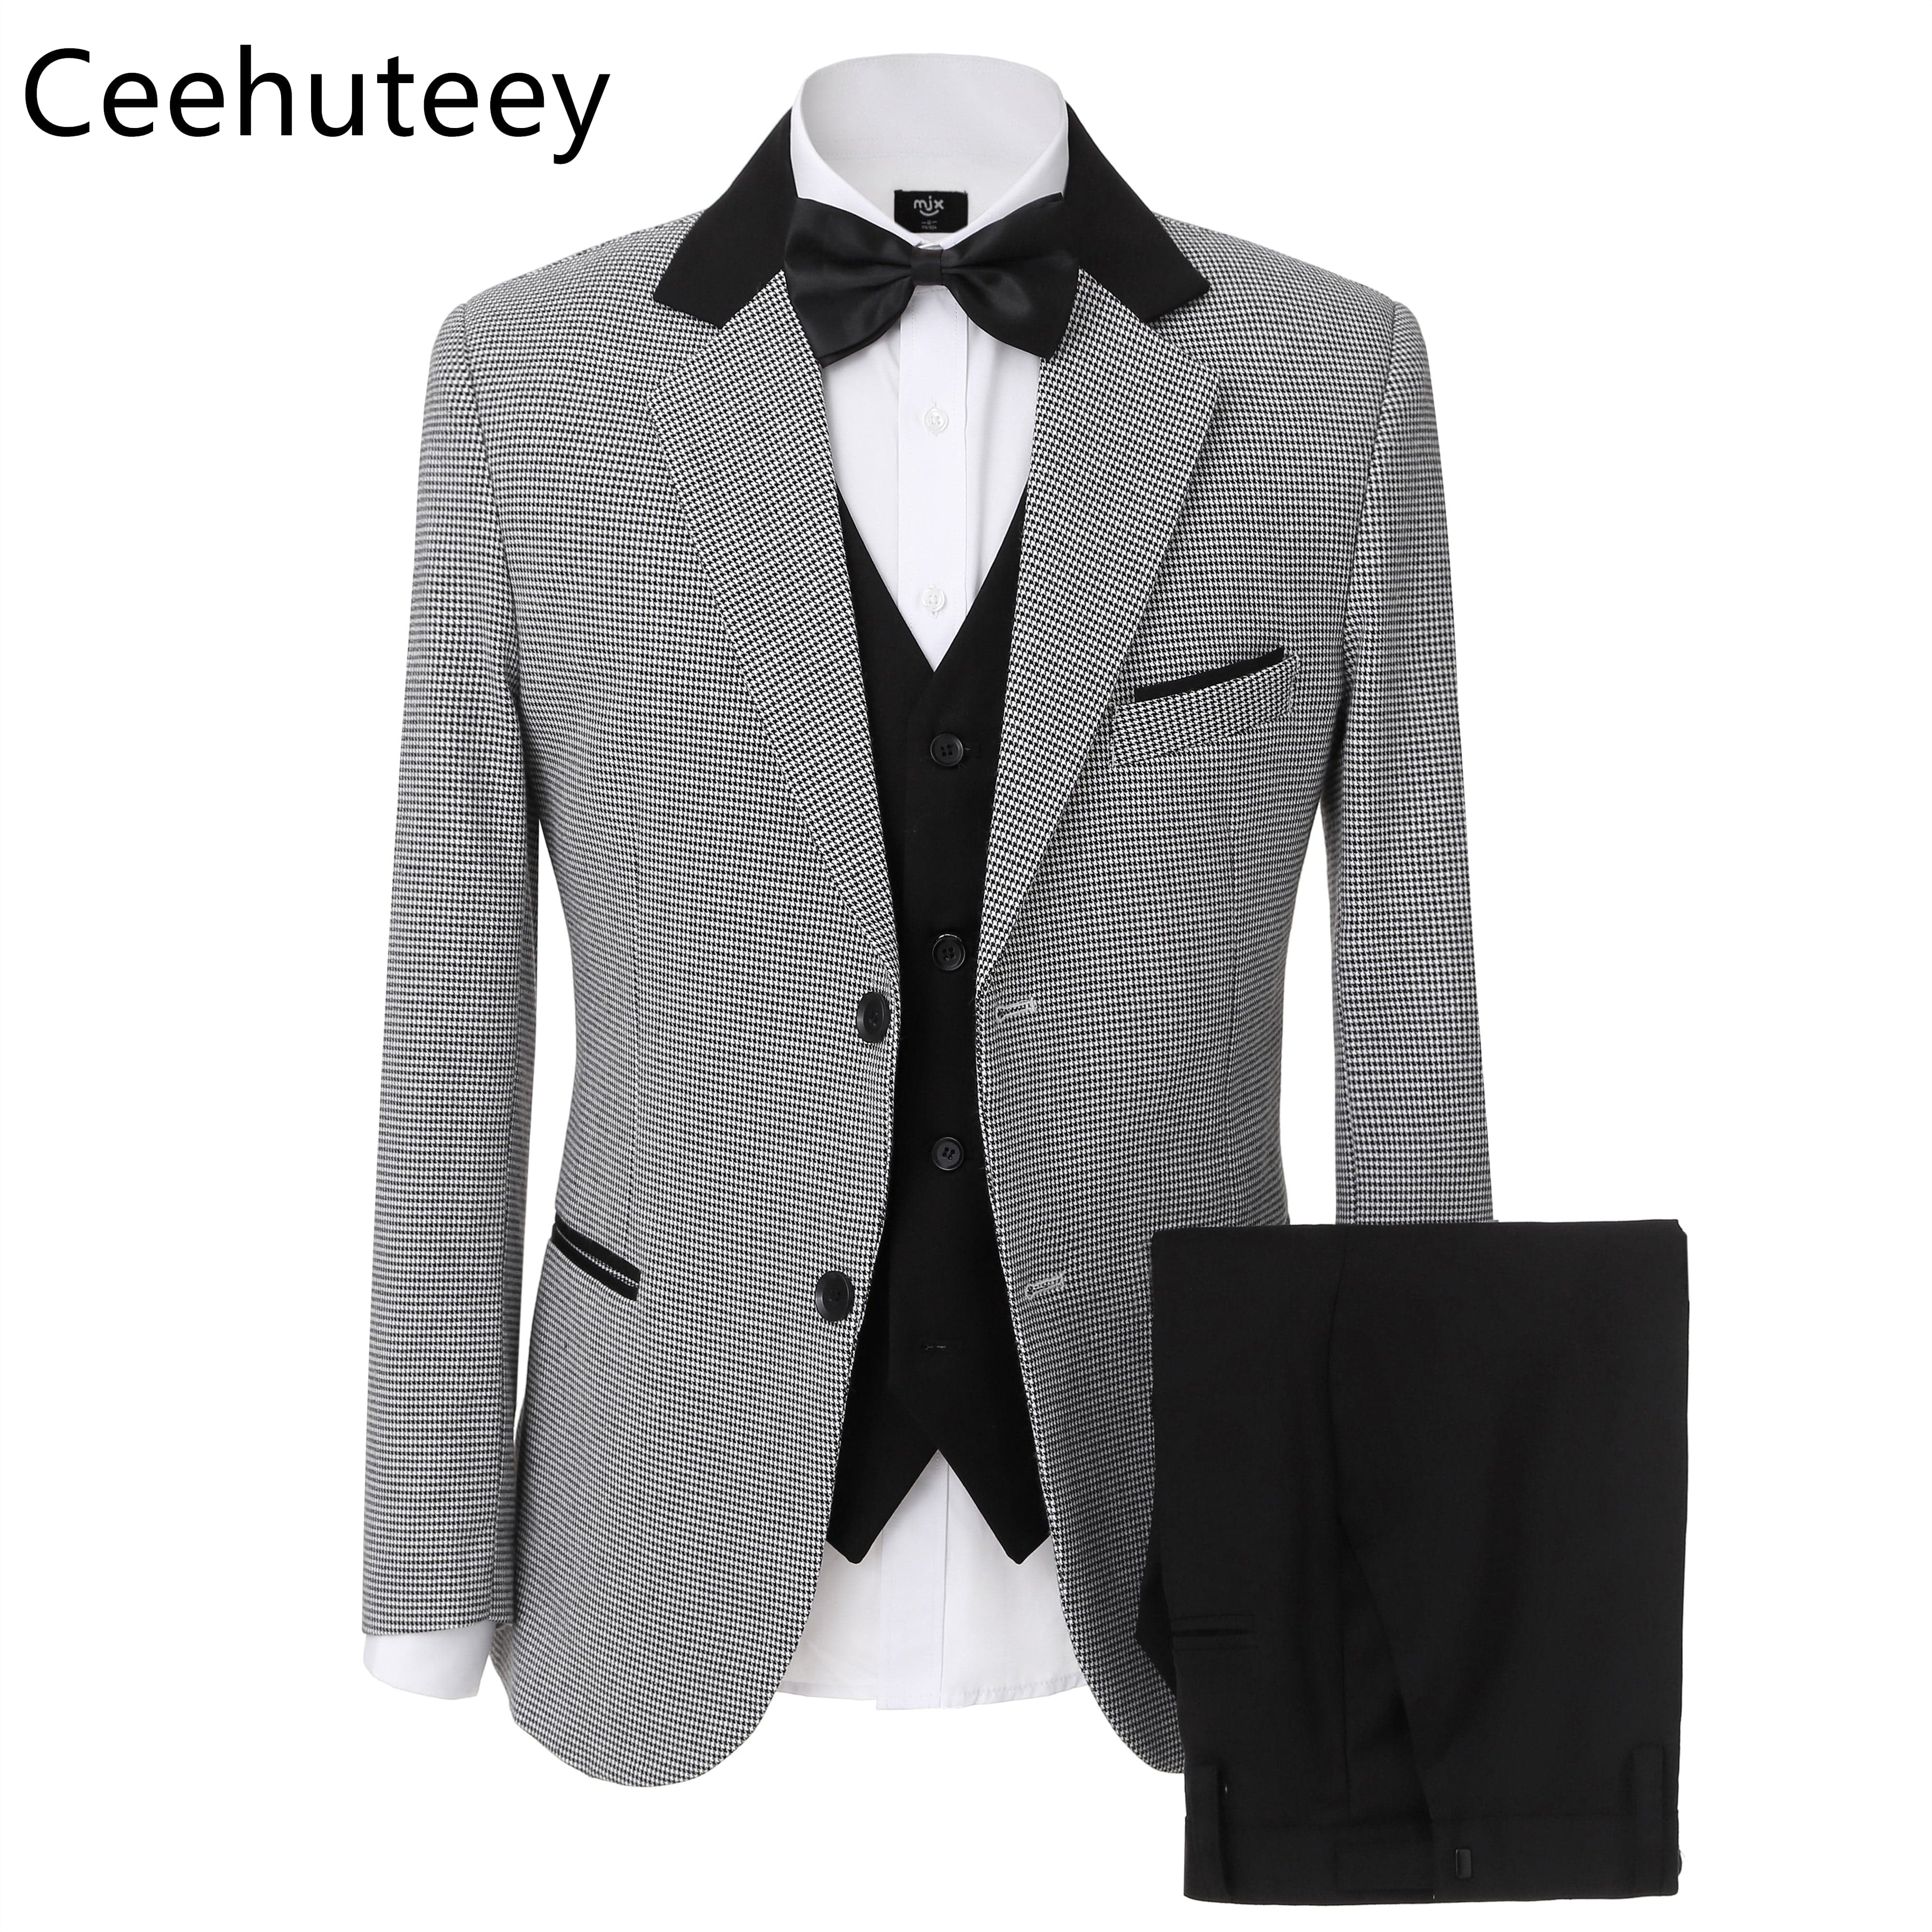 ceehuteey Men's Houndstooth Formal Notch Lapel  for wedding party Tuxedos (Blazer + Vest +Pant)